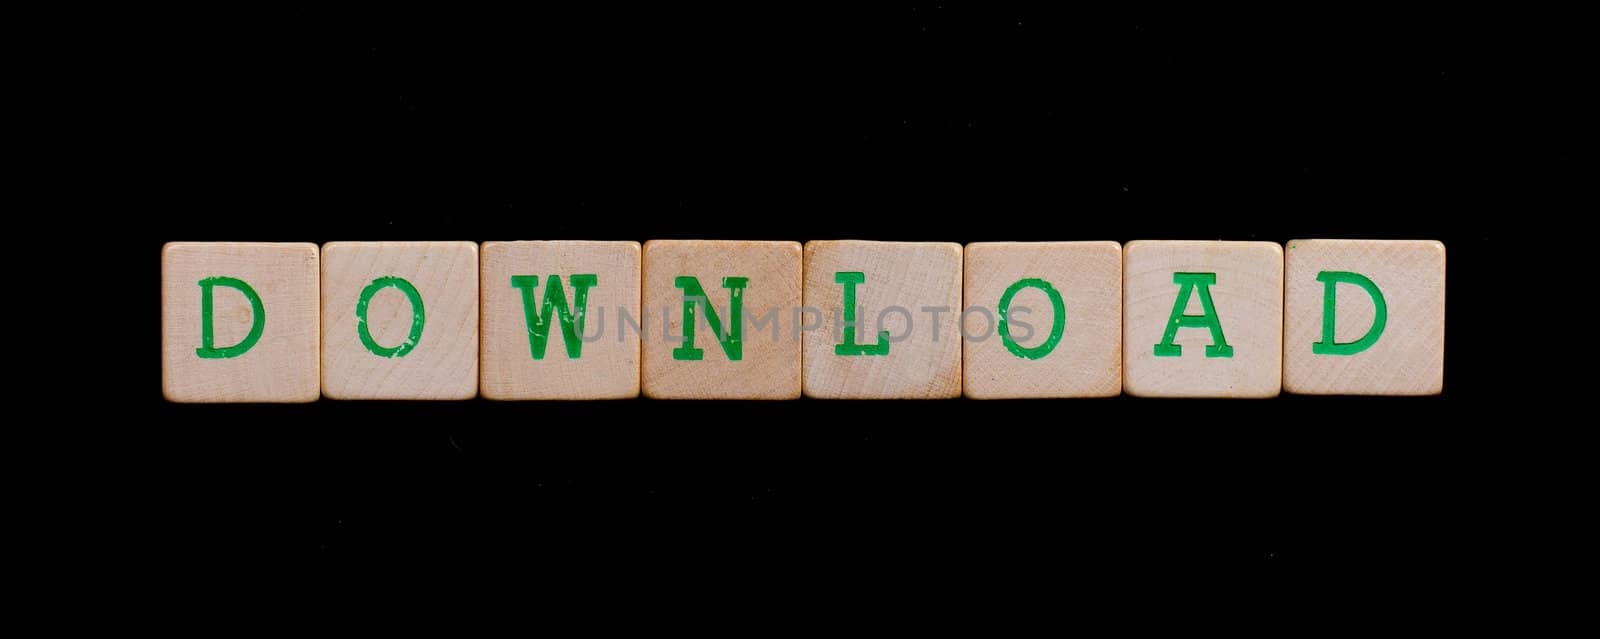 Green letters on old wooden blocks (download) by michaklootwijk